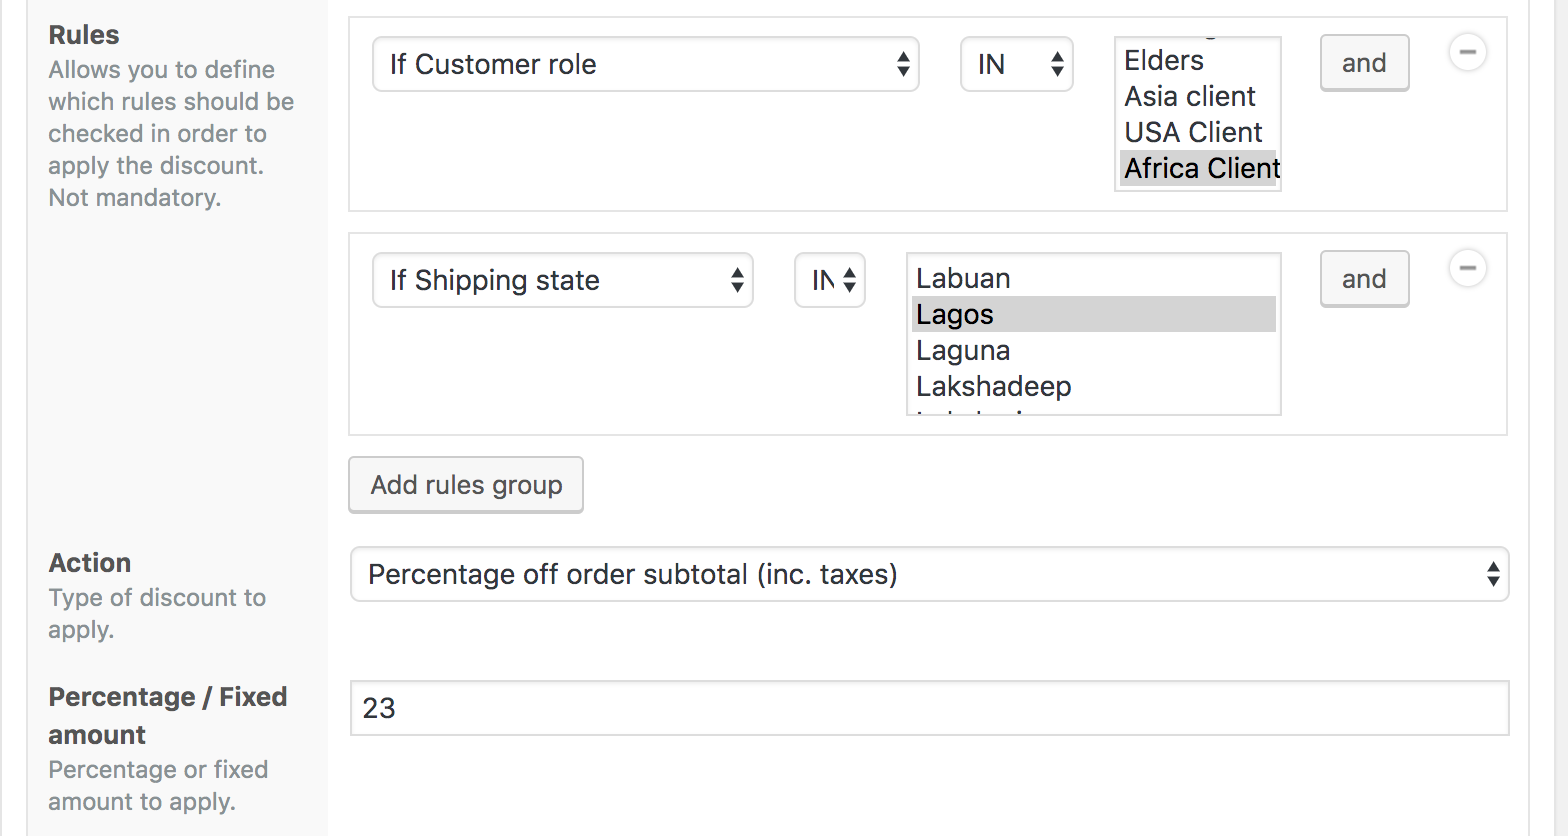 African client discount for Lagos shipping state